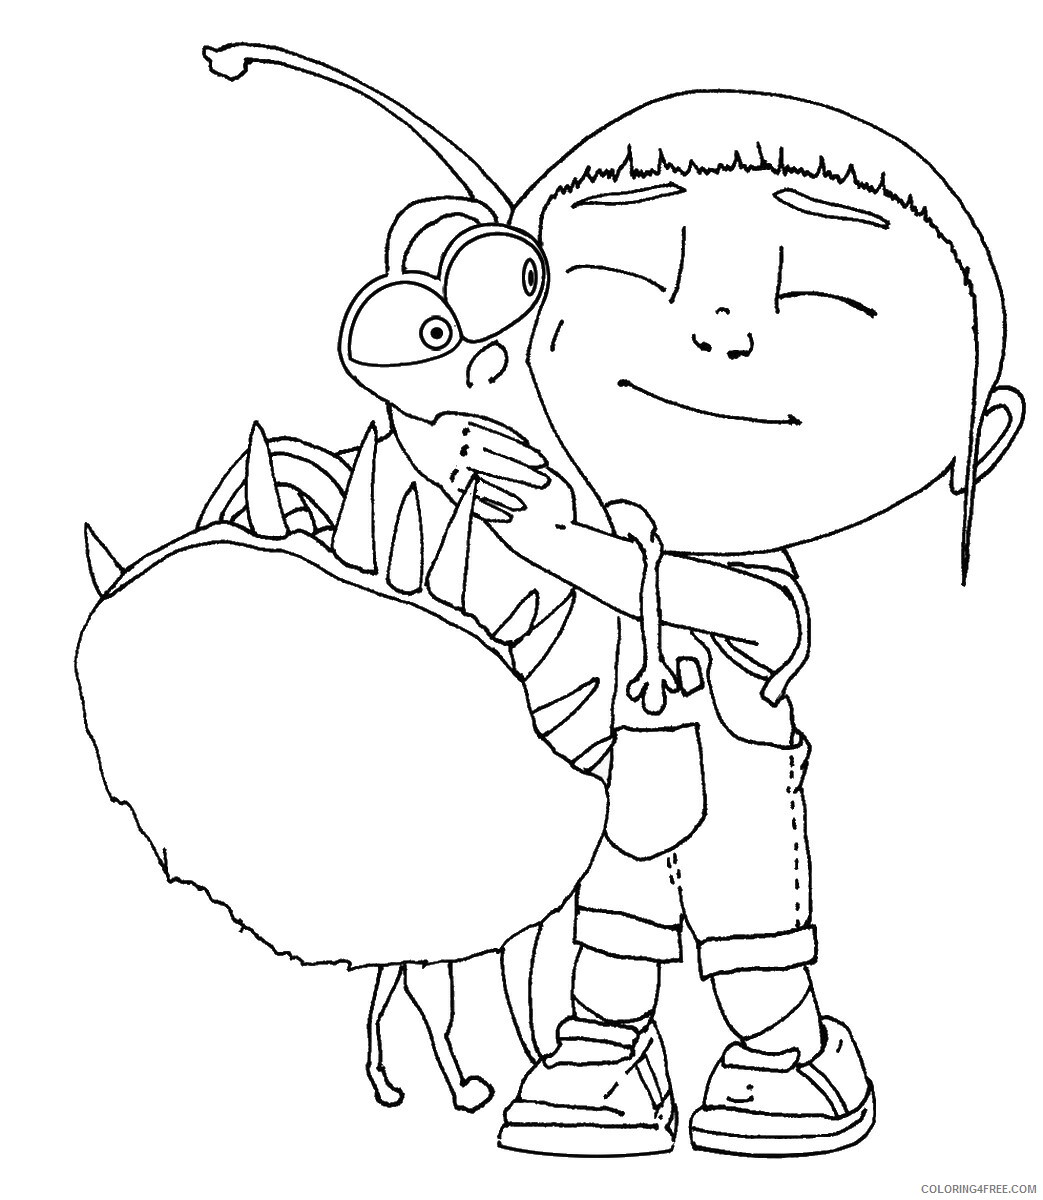 Despicable Me Coloring Pages TV Film despicable_me_cl_05 Printable 2020 02470 Coloring4free